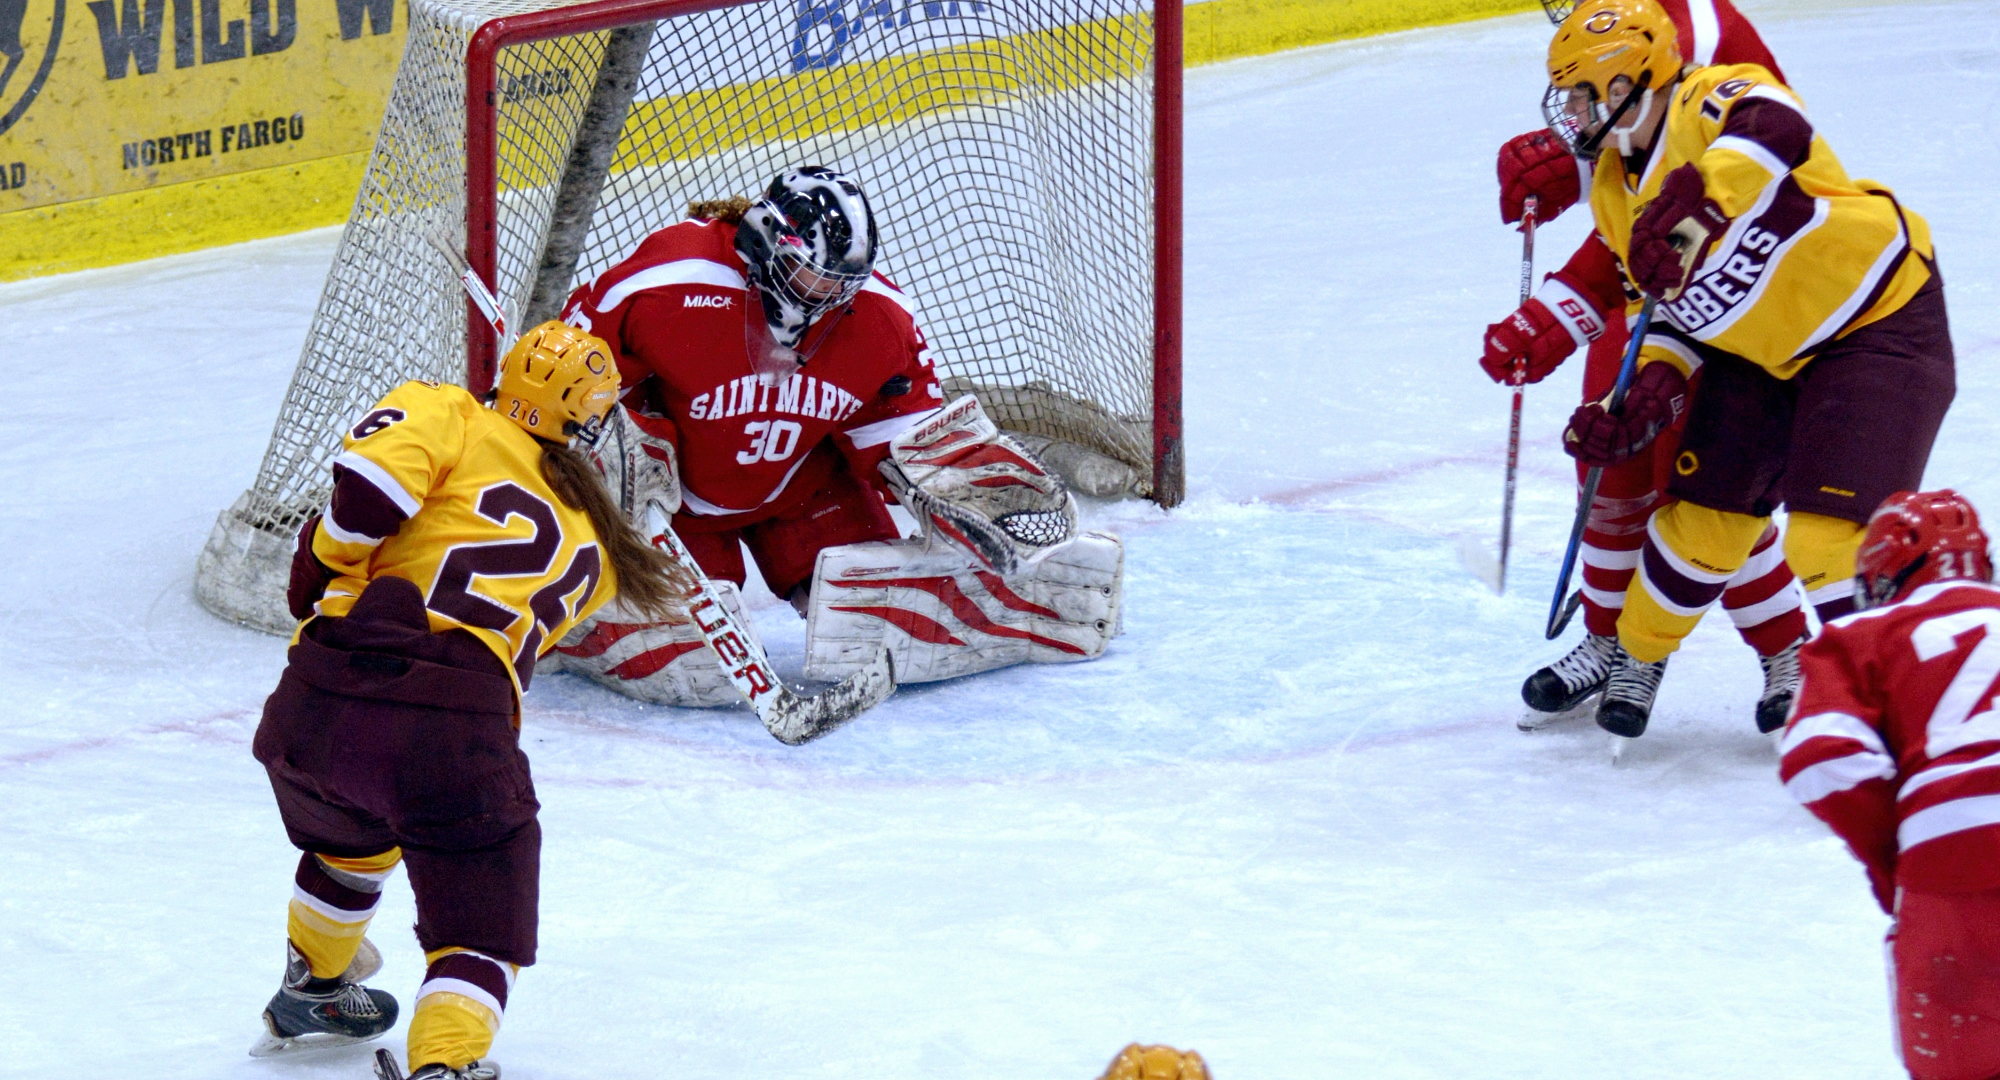 Tori Davis fires a puck on the St. Mary's goal during the third period of the Cobbers' 2-0 win over the Cardinals. Davis had both of the goals for CC.